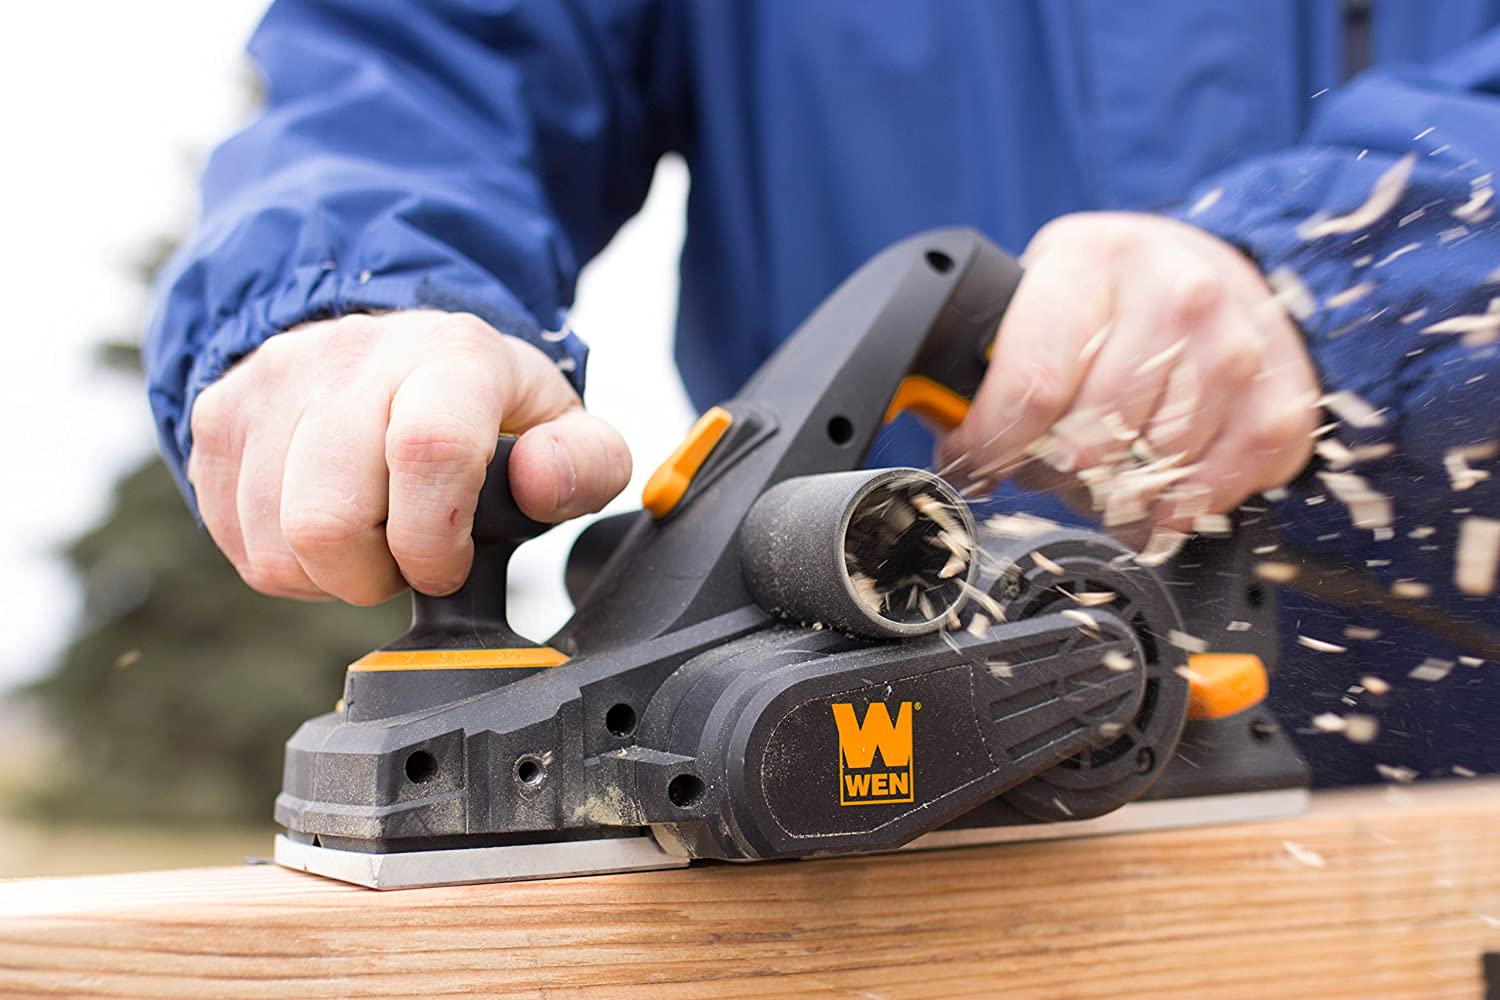 The Best Hand Held Wood Planer: A Comprehensive Product Review